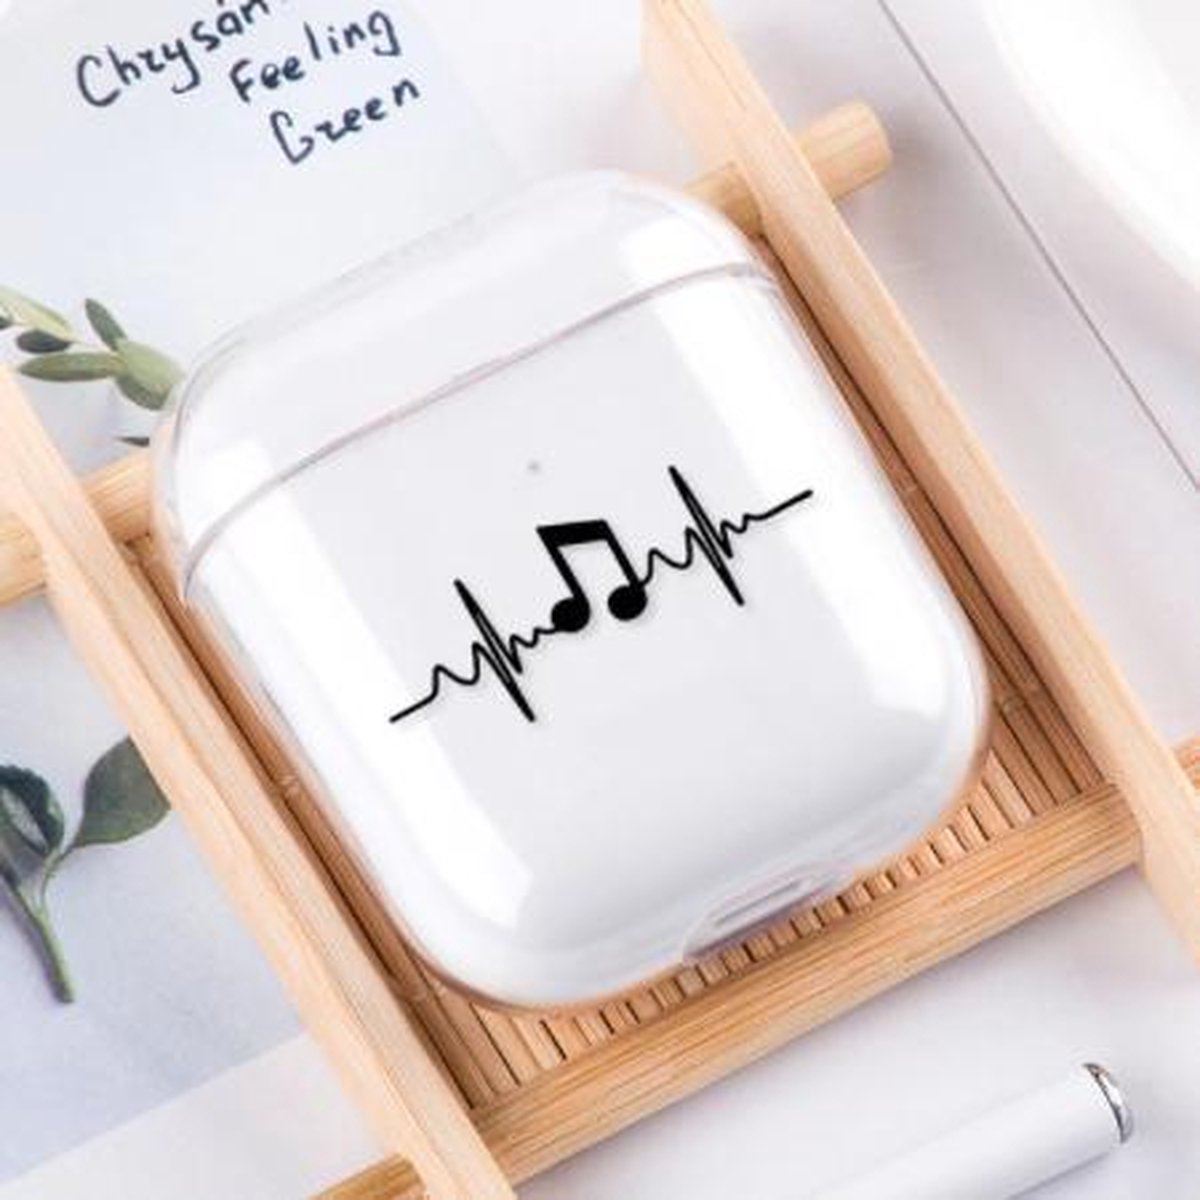 Airpod case transparant - Music - geschikt voor airpod 1 & 2 - hard cover case - airpods hoesje- airpods - - Boveld